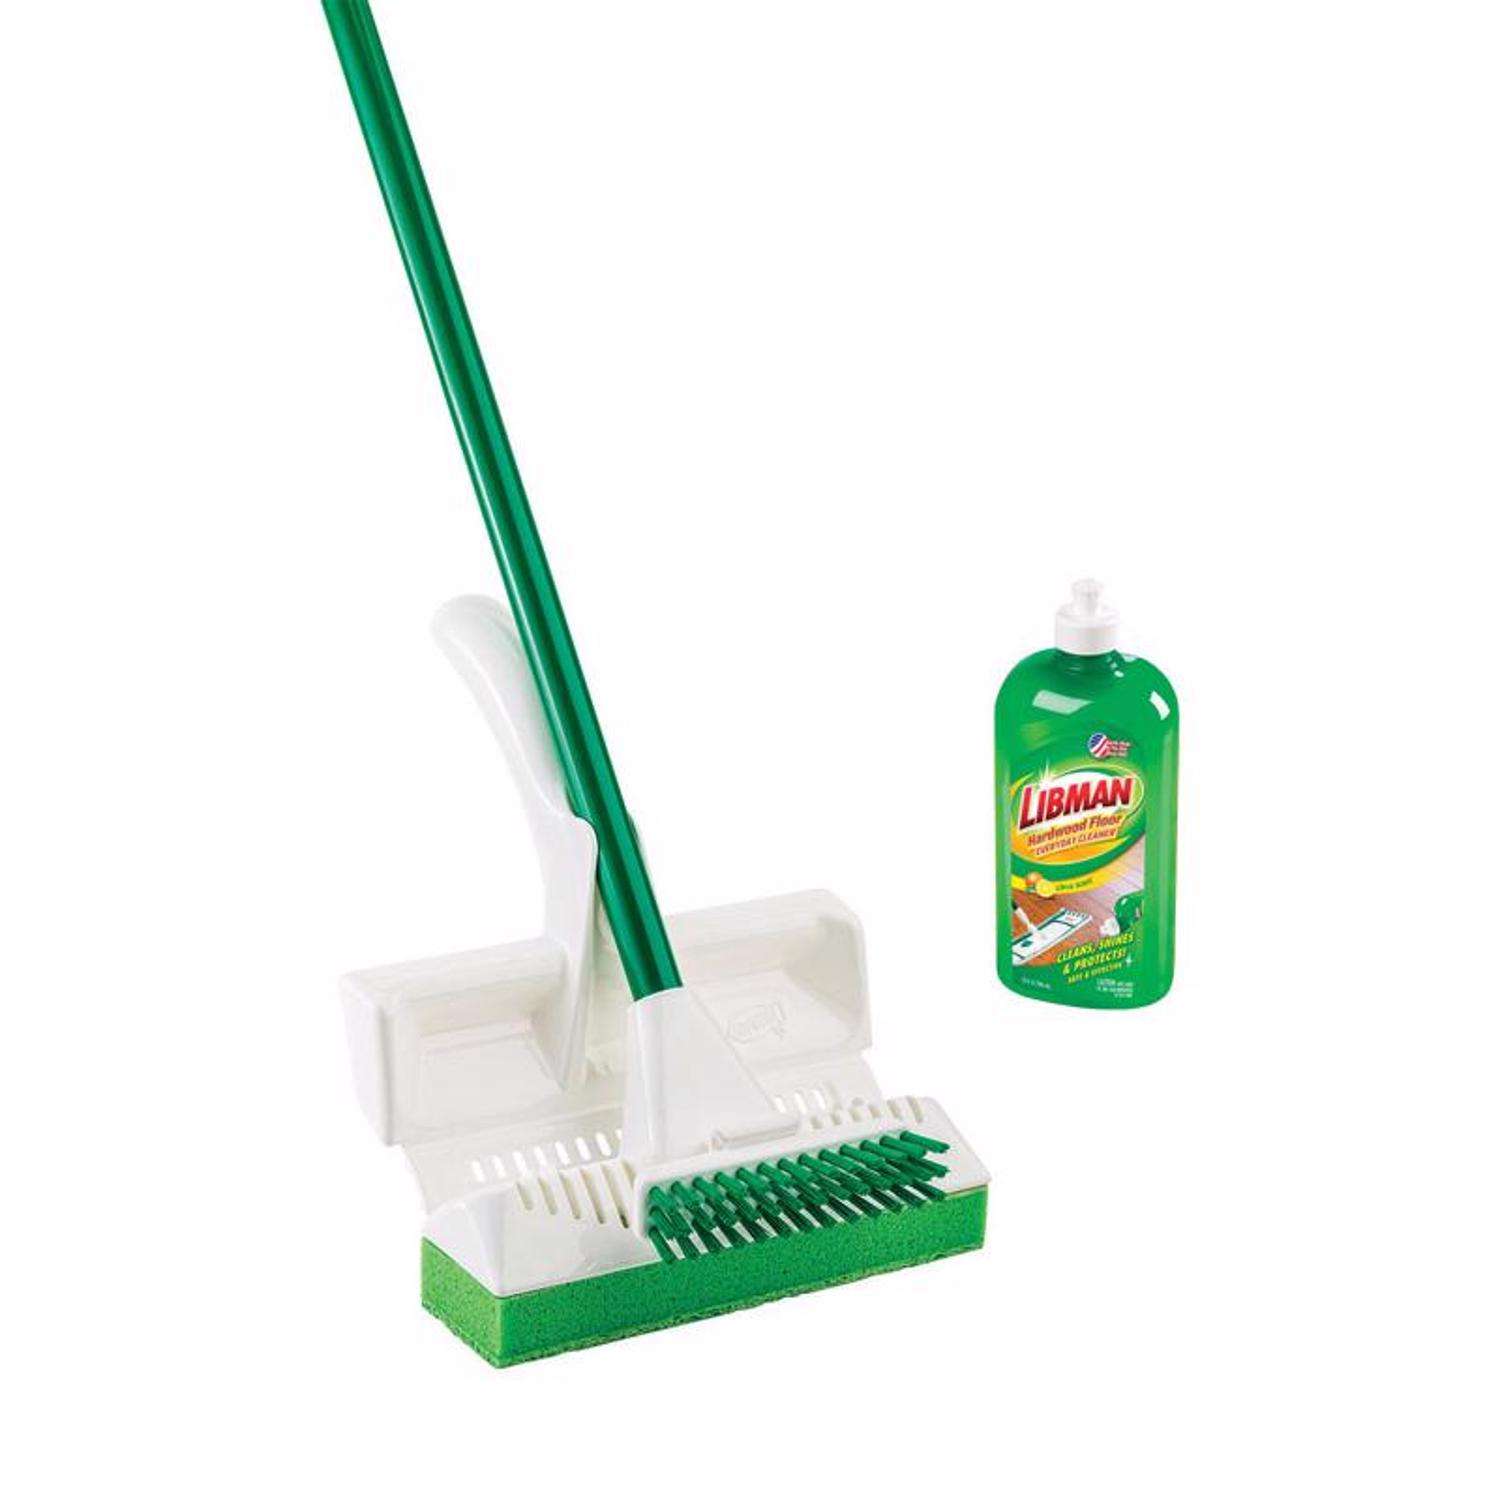 Dustpan and Brush Set - Nesting Design - Compact Storage - Comfortable Non-Slip Handle - Odor Resistant - Cleaning Floors, Counters, Tables, Bathroom